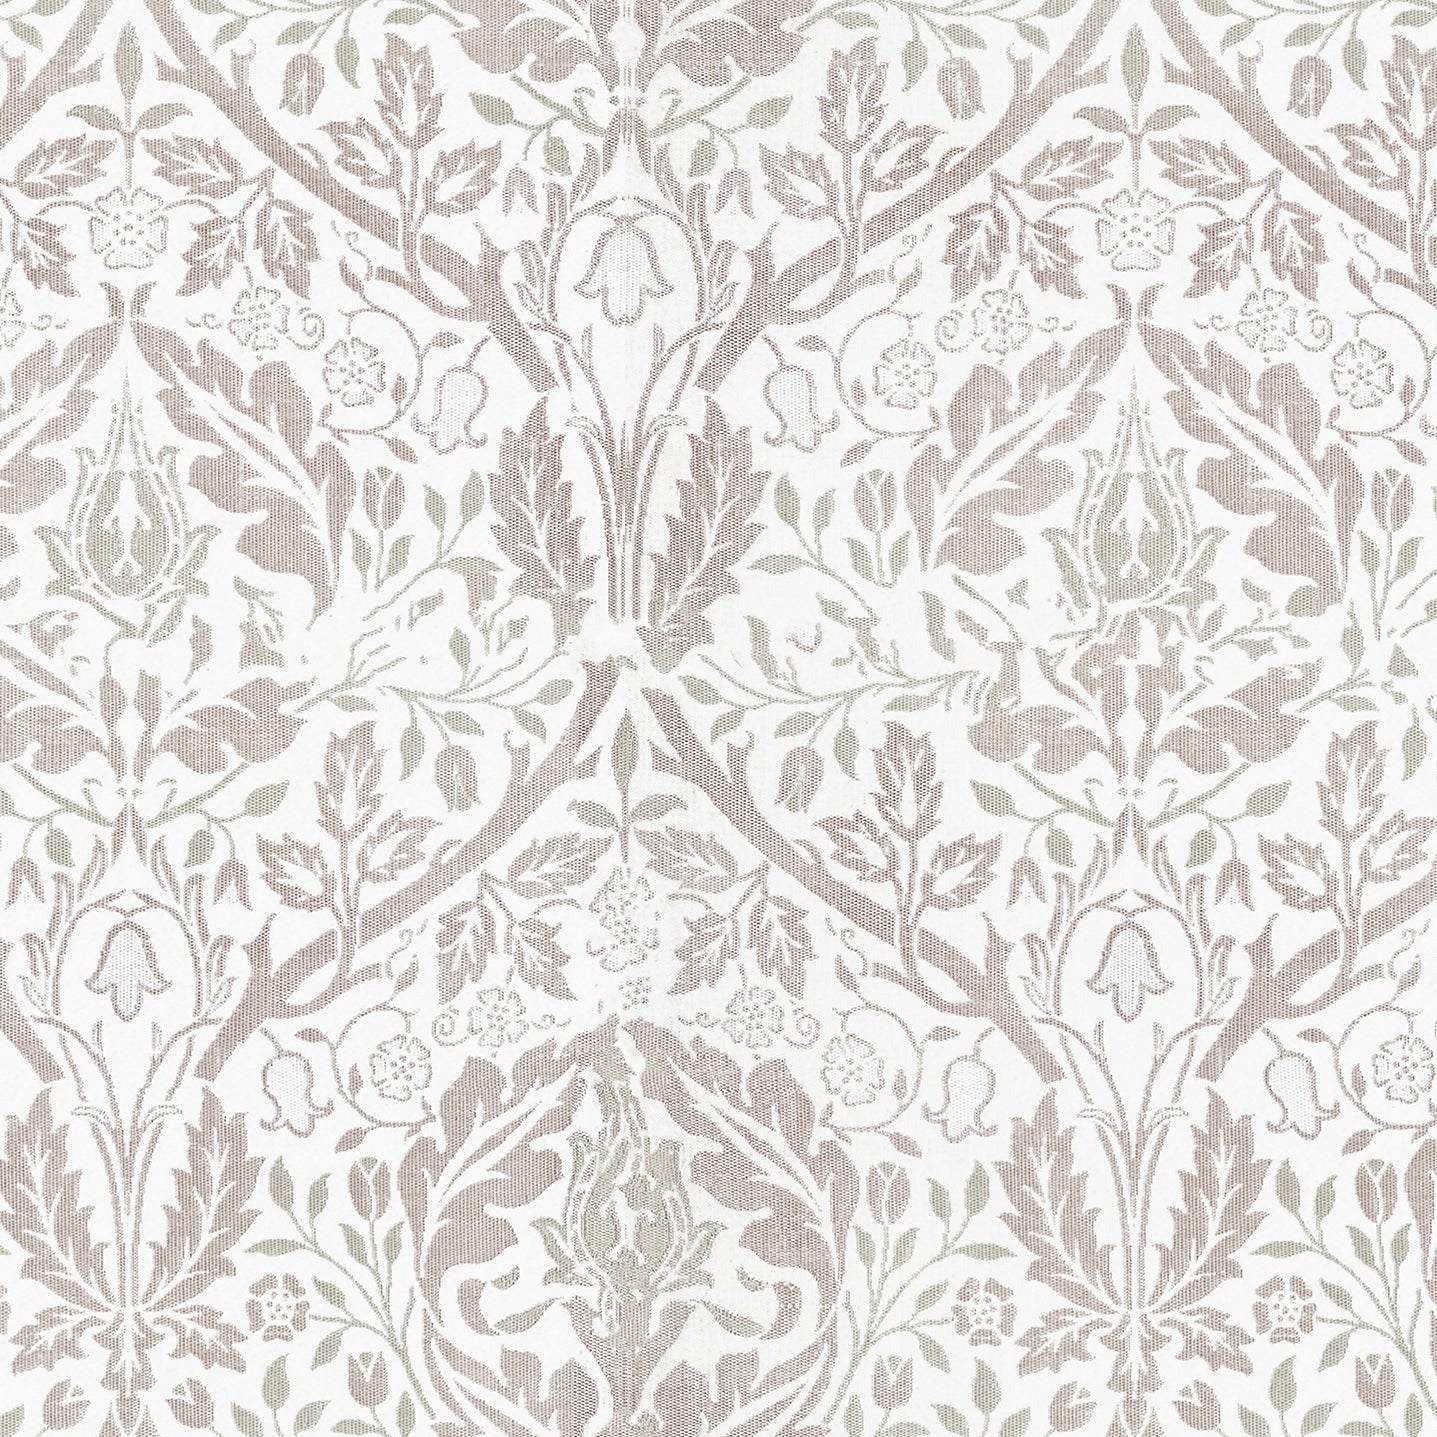 Close-up of an elegant floral wallpaper pattern in soft gray and beige tones. The design features intricate flowers and foliage, styled in a traditional manner, giving a timeless and sophisticated look suitable for various interior spaces.